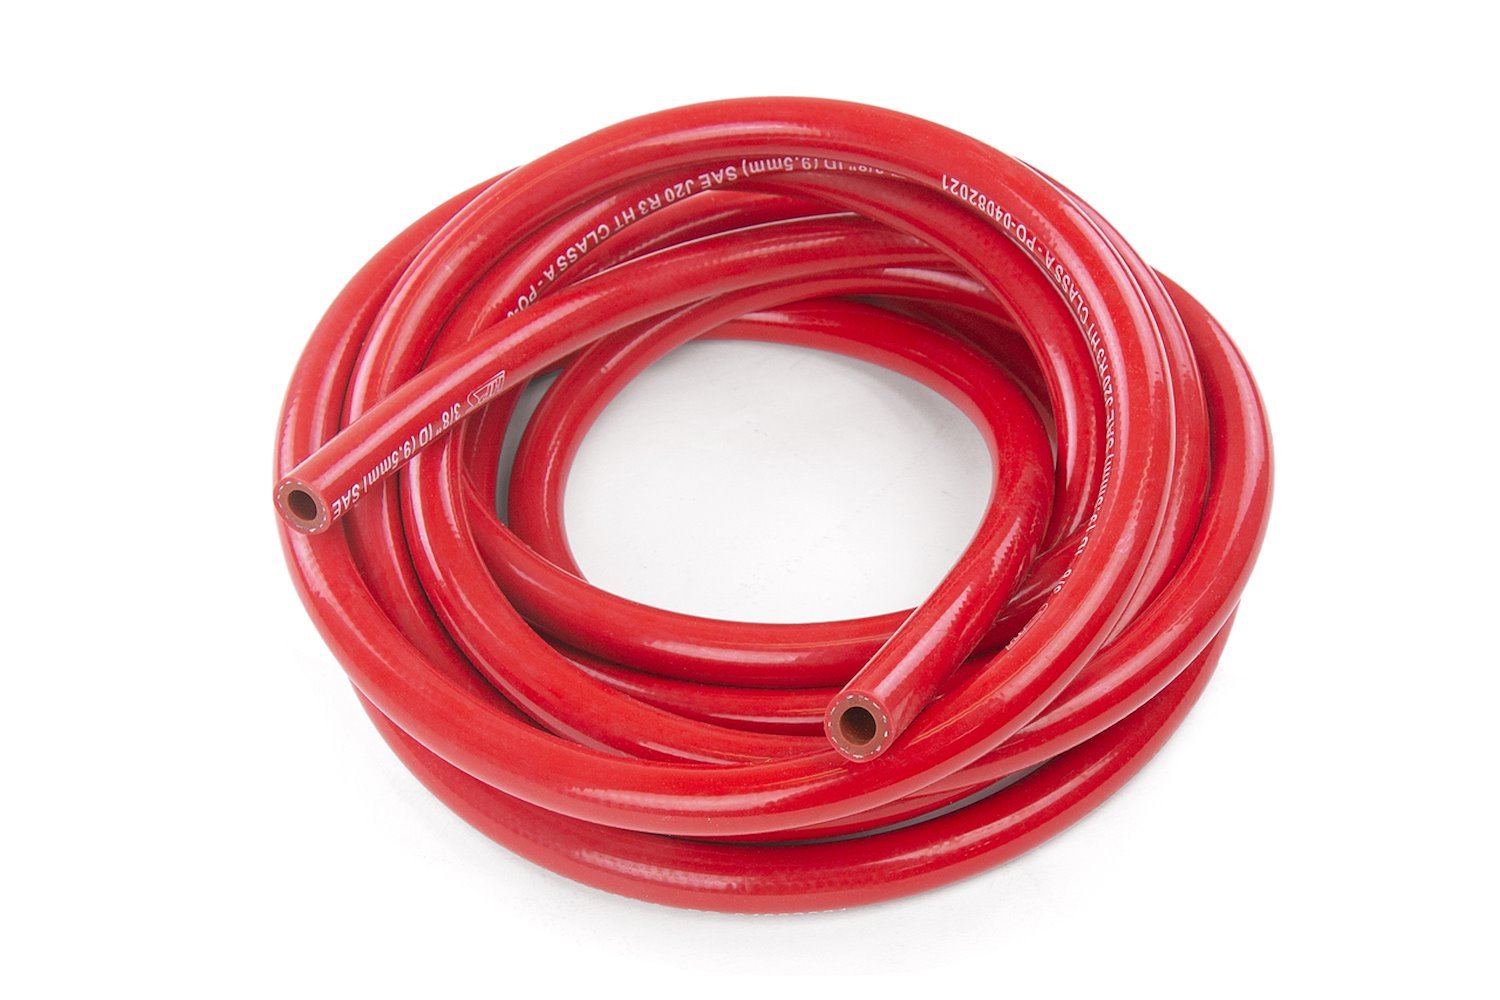 HTHH-087-REDx25 Silicone Heater Hose Tubing, High-Temp 1-Ply Reinforced, 7/8 in. ID, 25 ft. Roll, Red